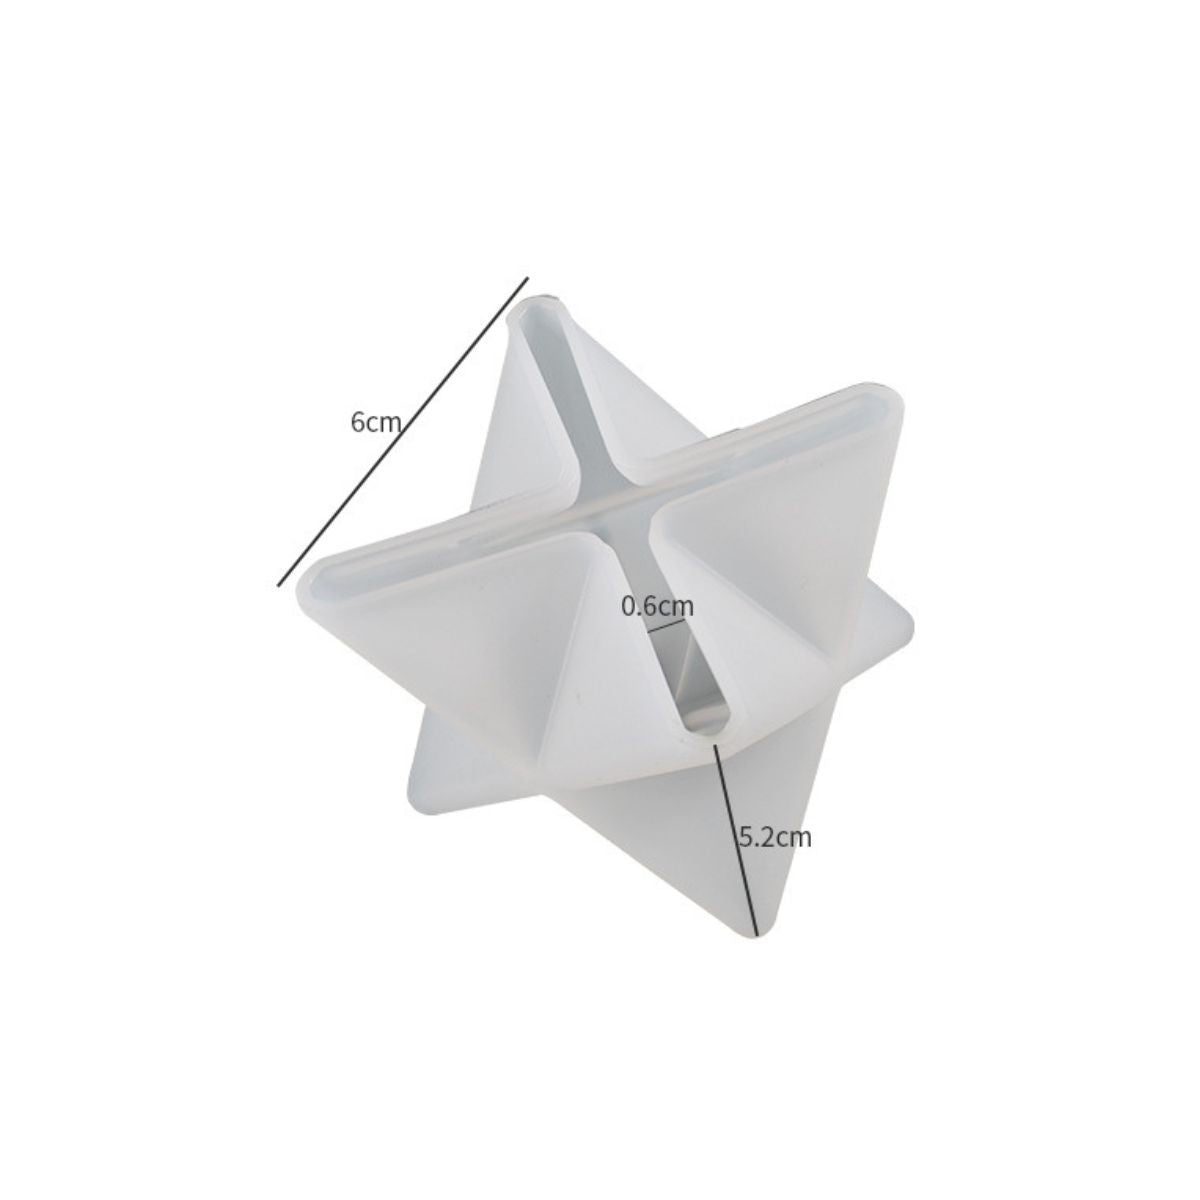 3D Star Shape Resin Silicone Mold - size 6x6 x 5.2cm